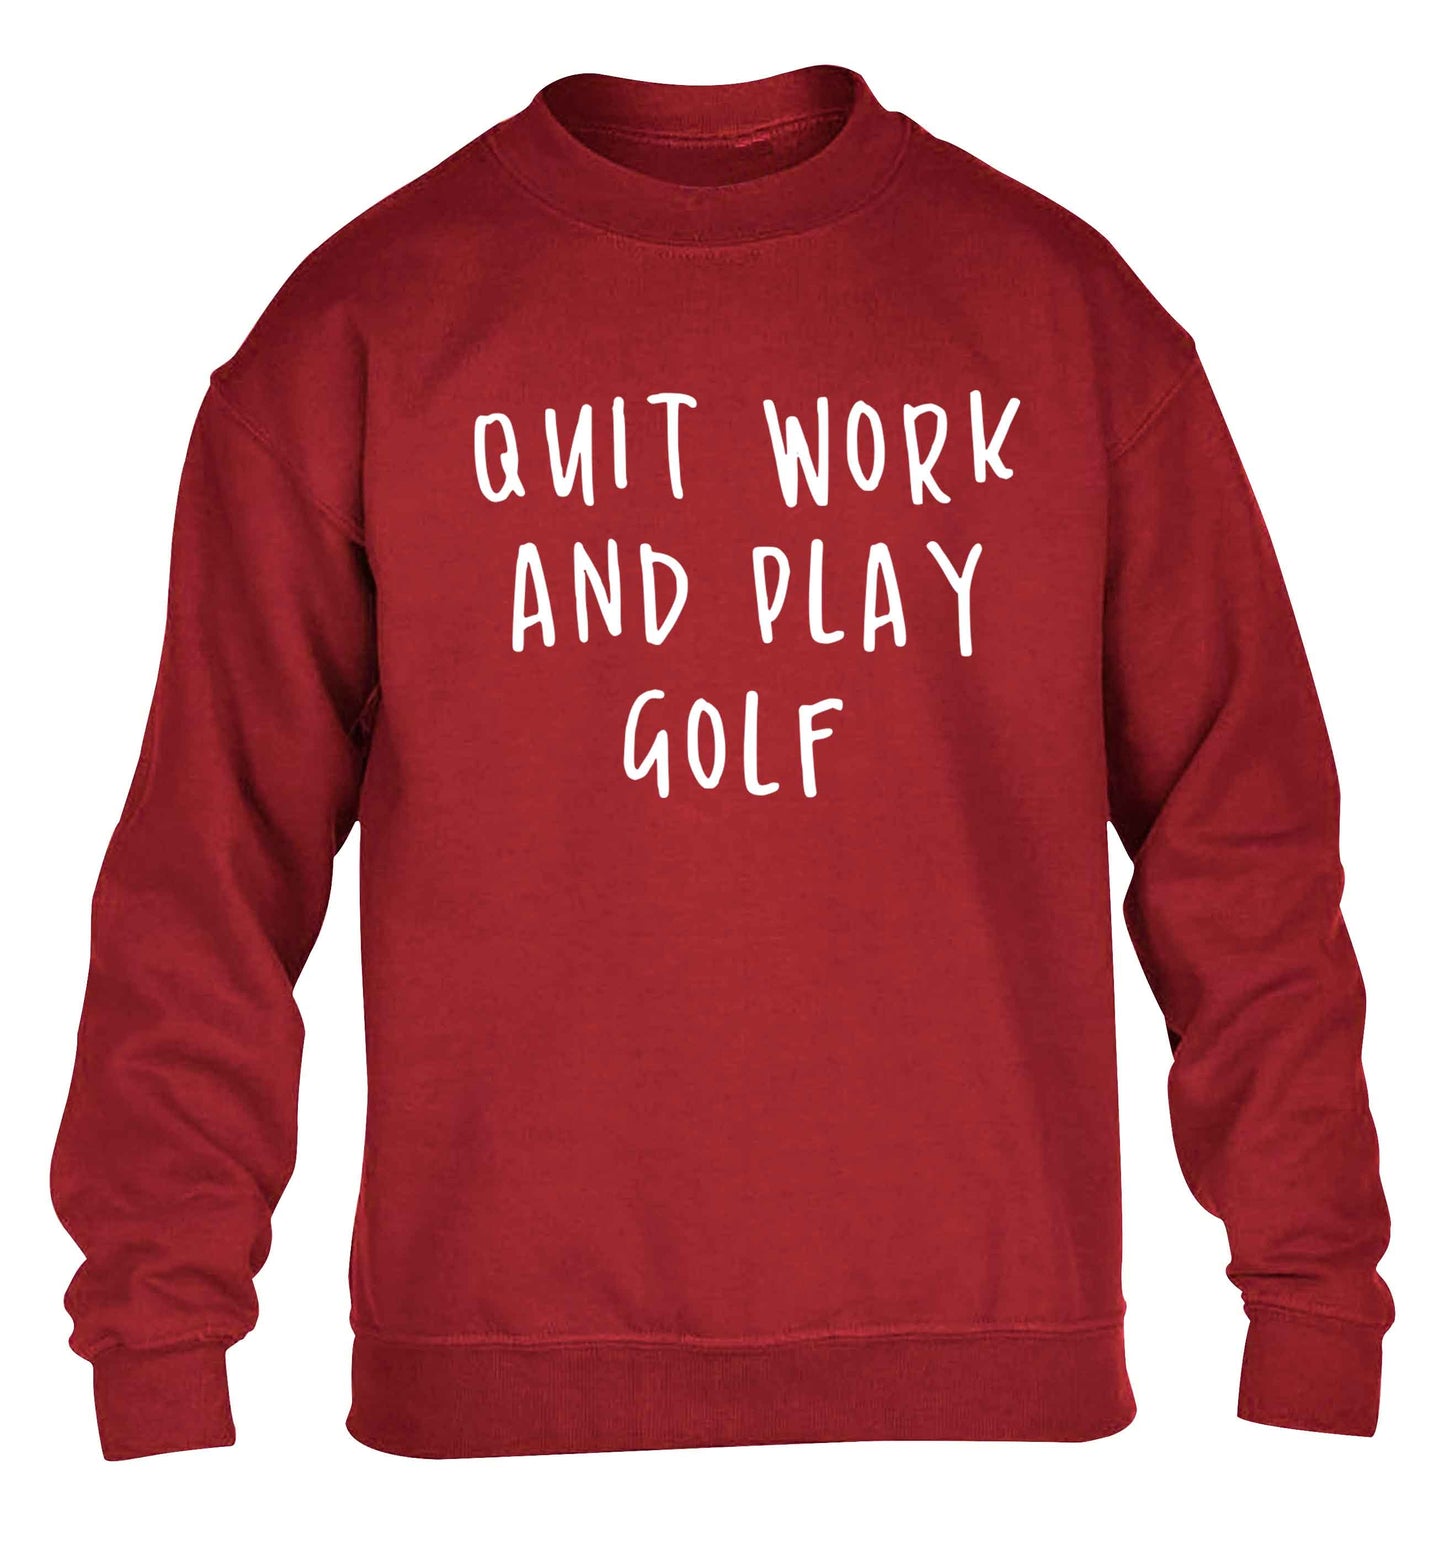 Quit work and play golf children's grey sweater 12-13 Years